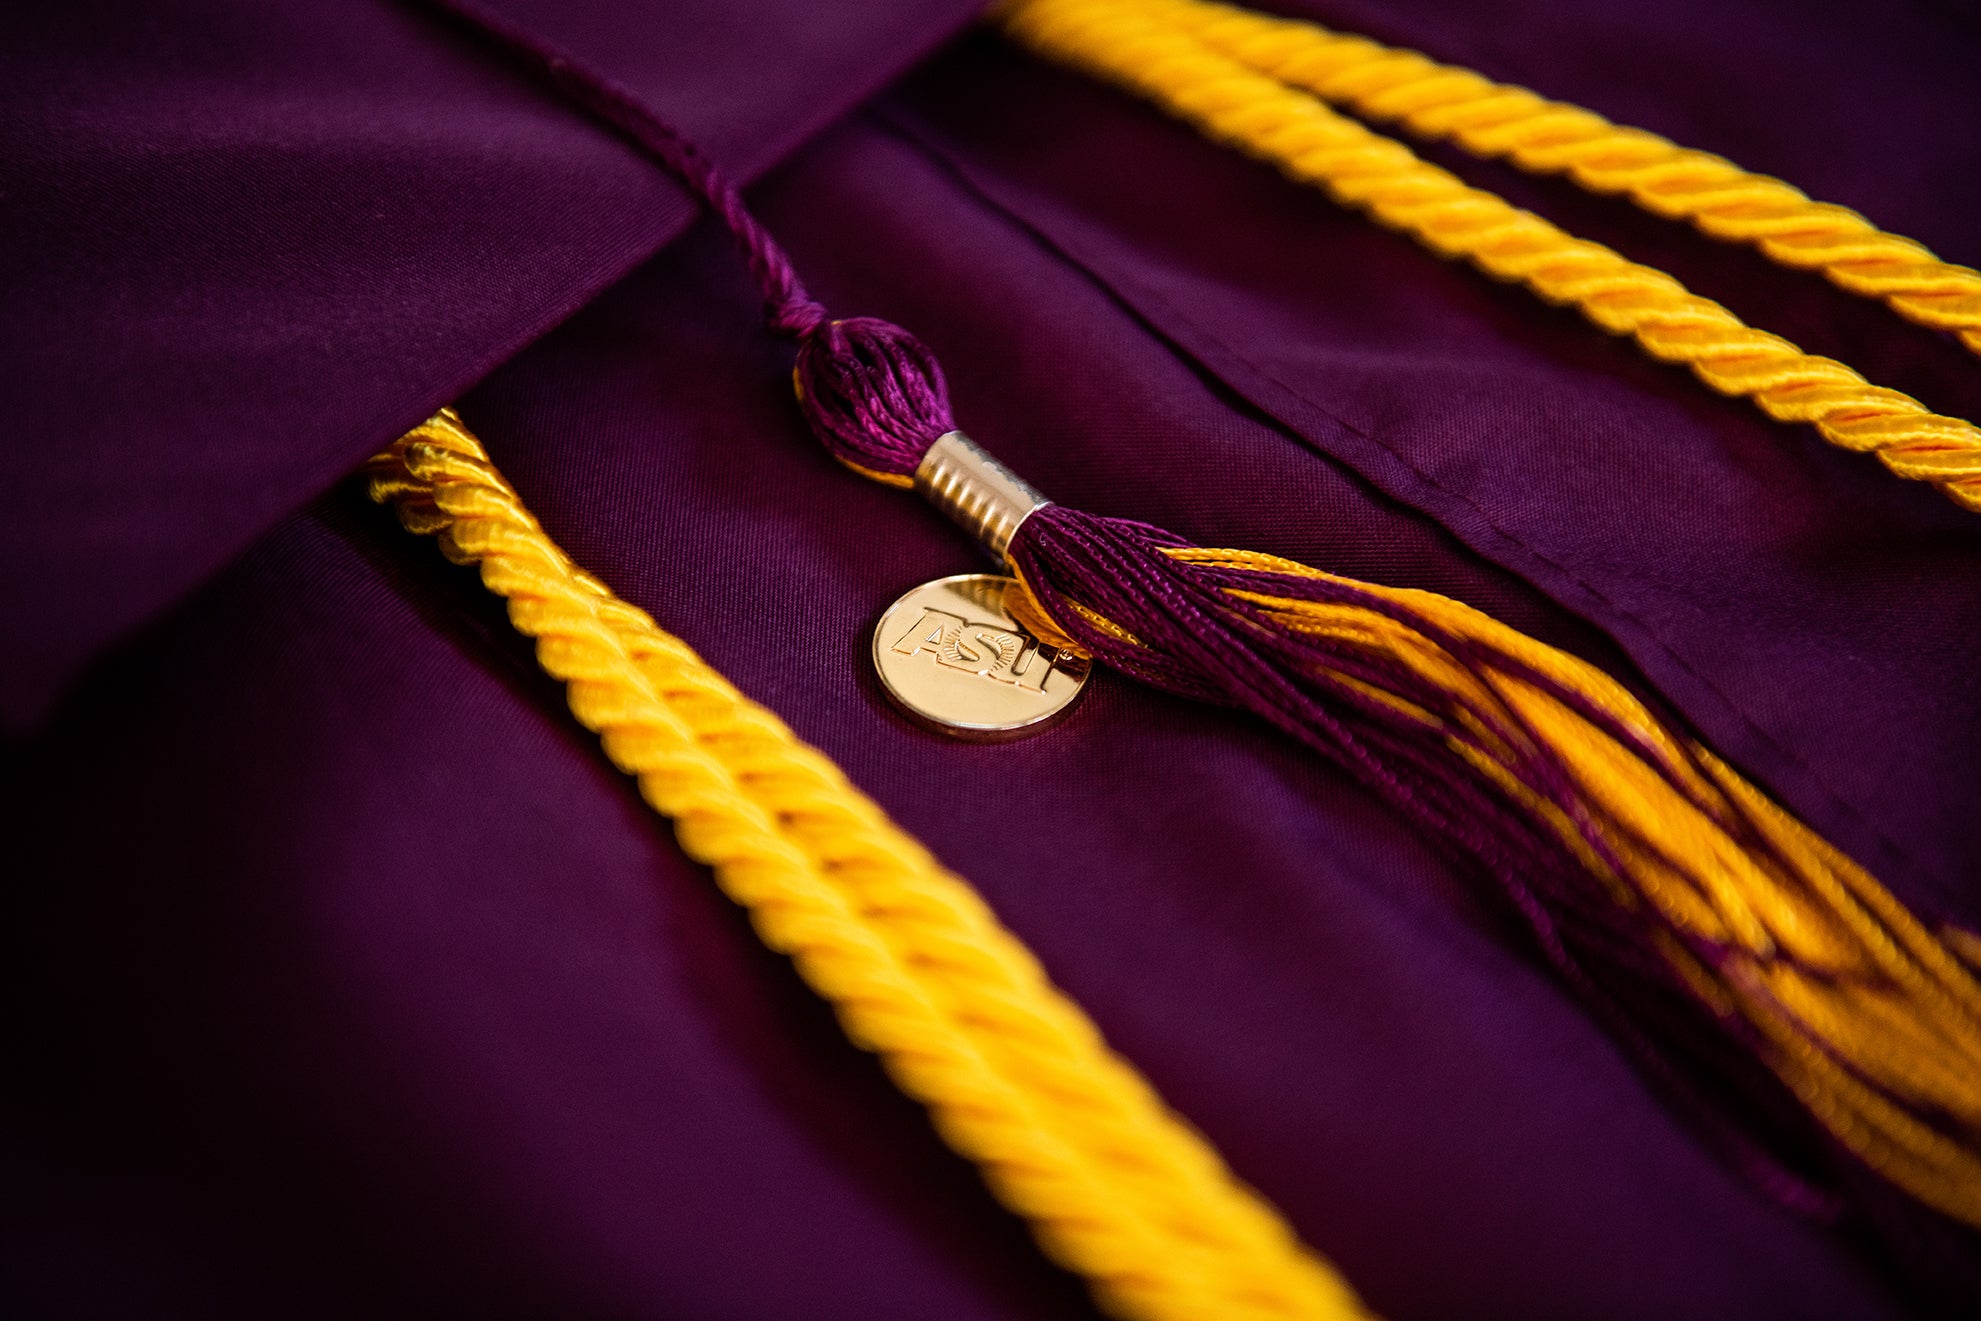 commencement regalia, maroon robes and "asu" gold charm on tassel